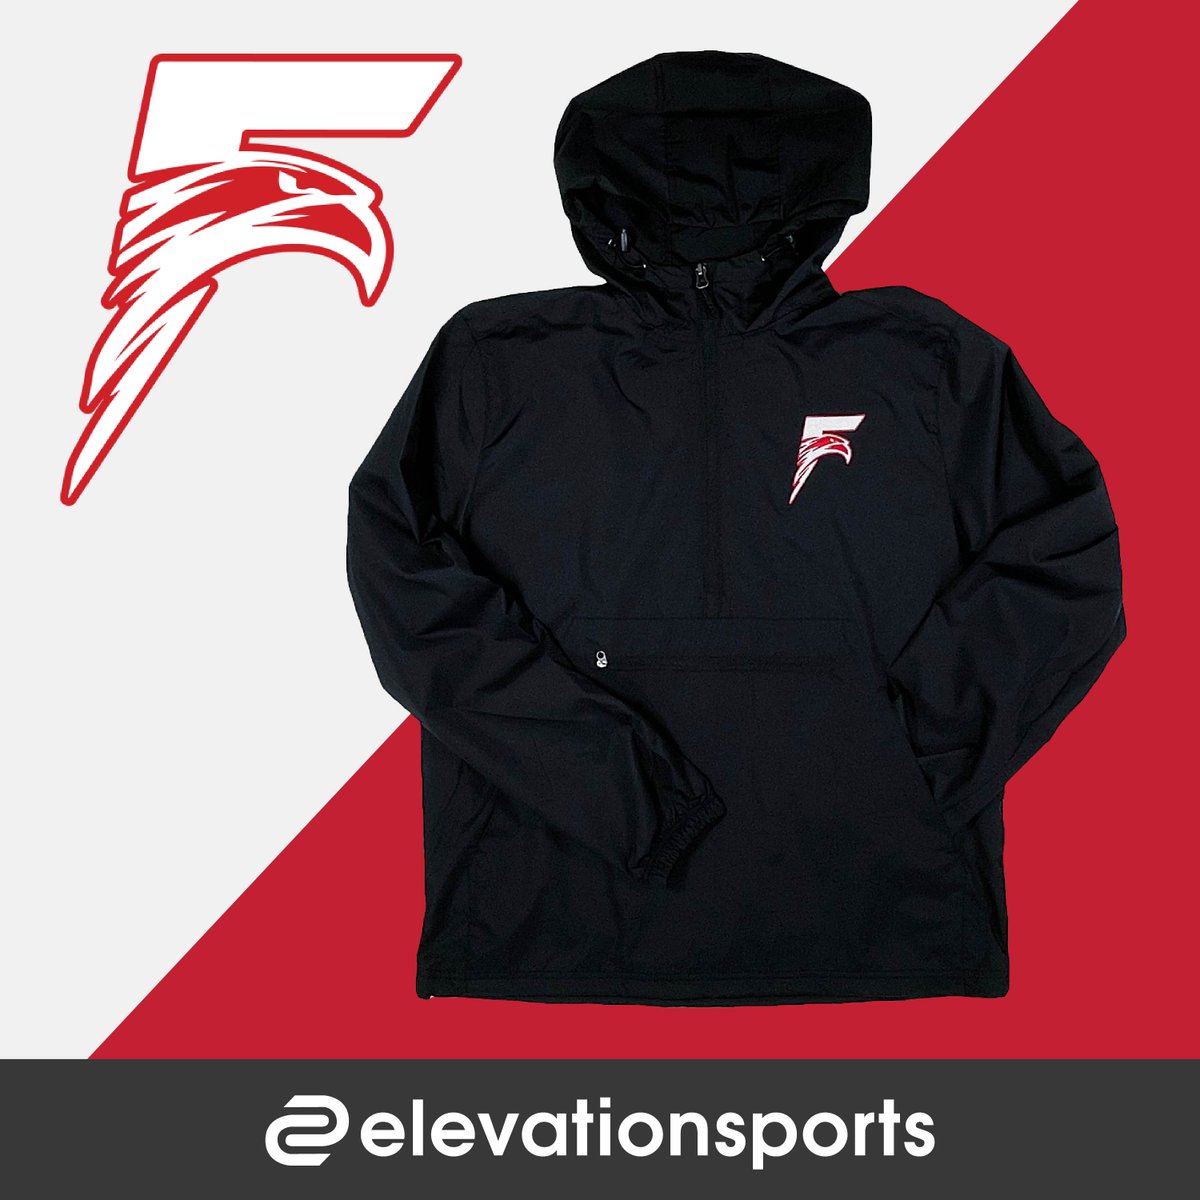 The Sport-Tek Pullover Warm-Up Jacket is perfect and just waiting for your custom embroidery ideas
buff.ly/46aAAWF 
#ElevationSports #ElevationSportsTeamStore #Design #Merch #CustomDesign #CustomApparel #YourDesignHere #Embroidery #CustomEmbroidery #LaxDesign